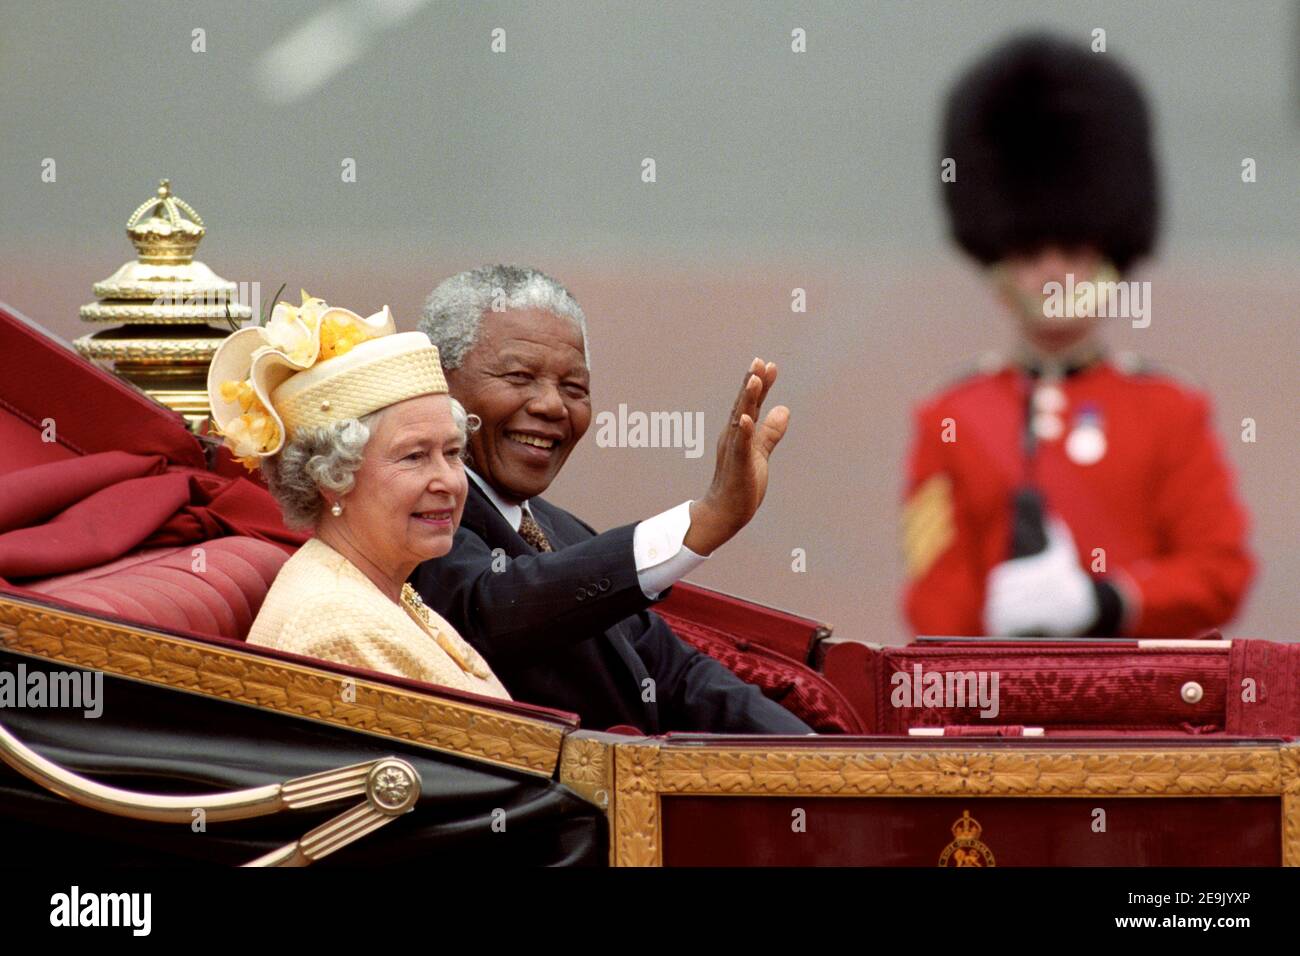 File photo dated 09/07/96 of then South African President Nelson Mandela and Queen Elizabeth II riding in a carriage along the Mall on the first full day of his state visit to the UK. The Queen will have reigned as monarch for 69 years on Saturday. Stock Photo